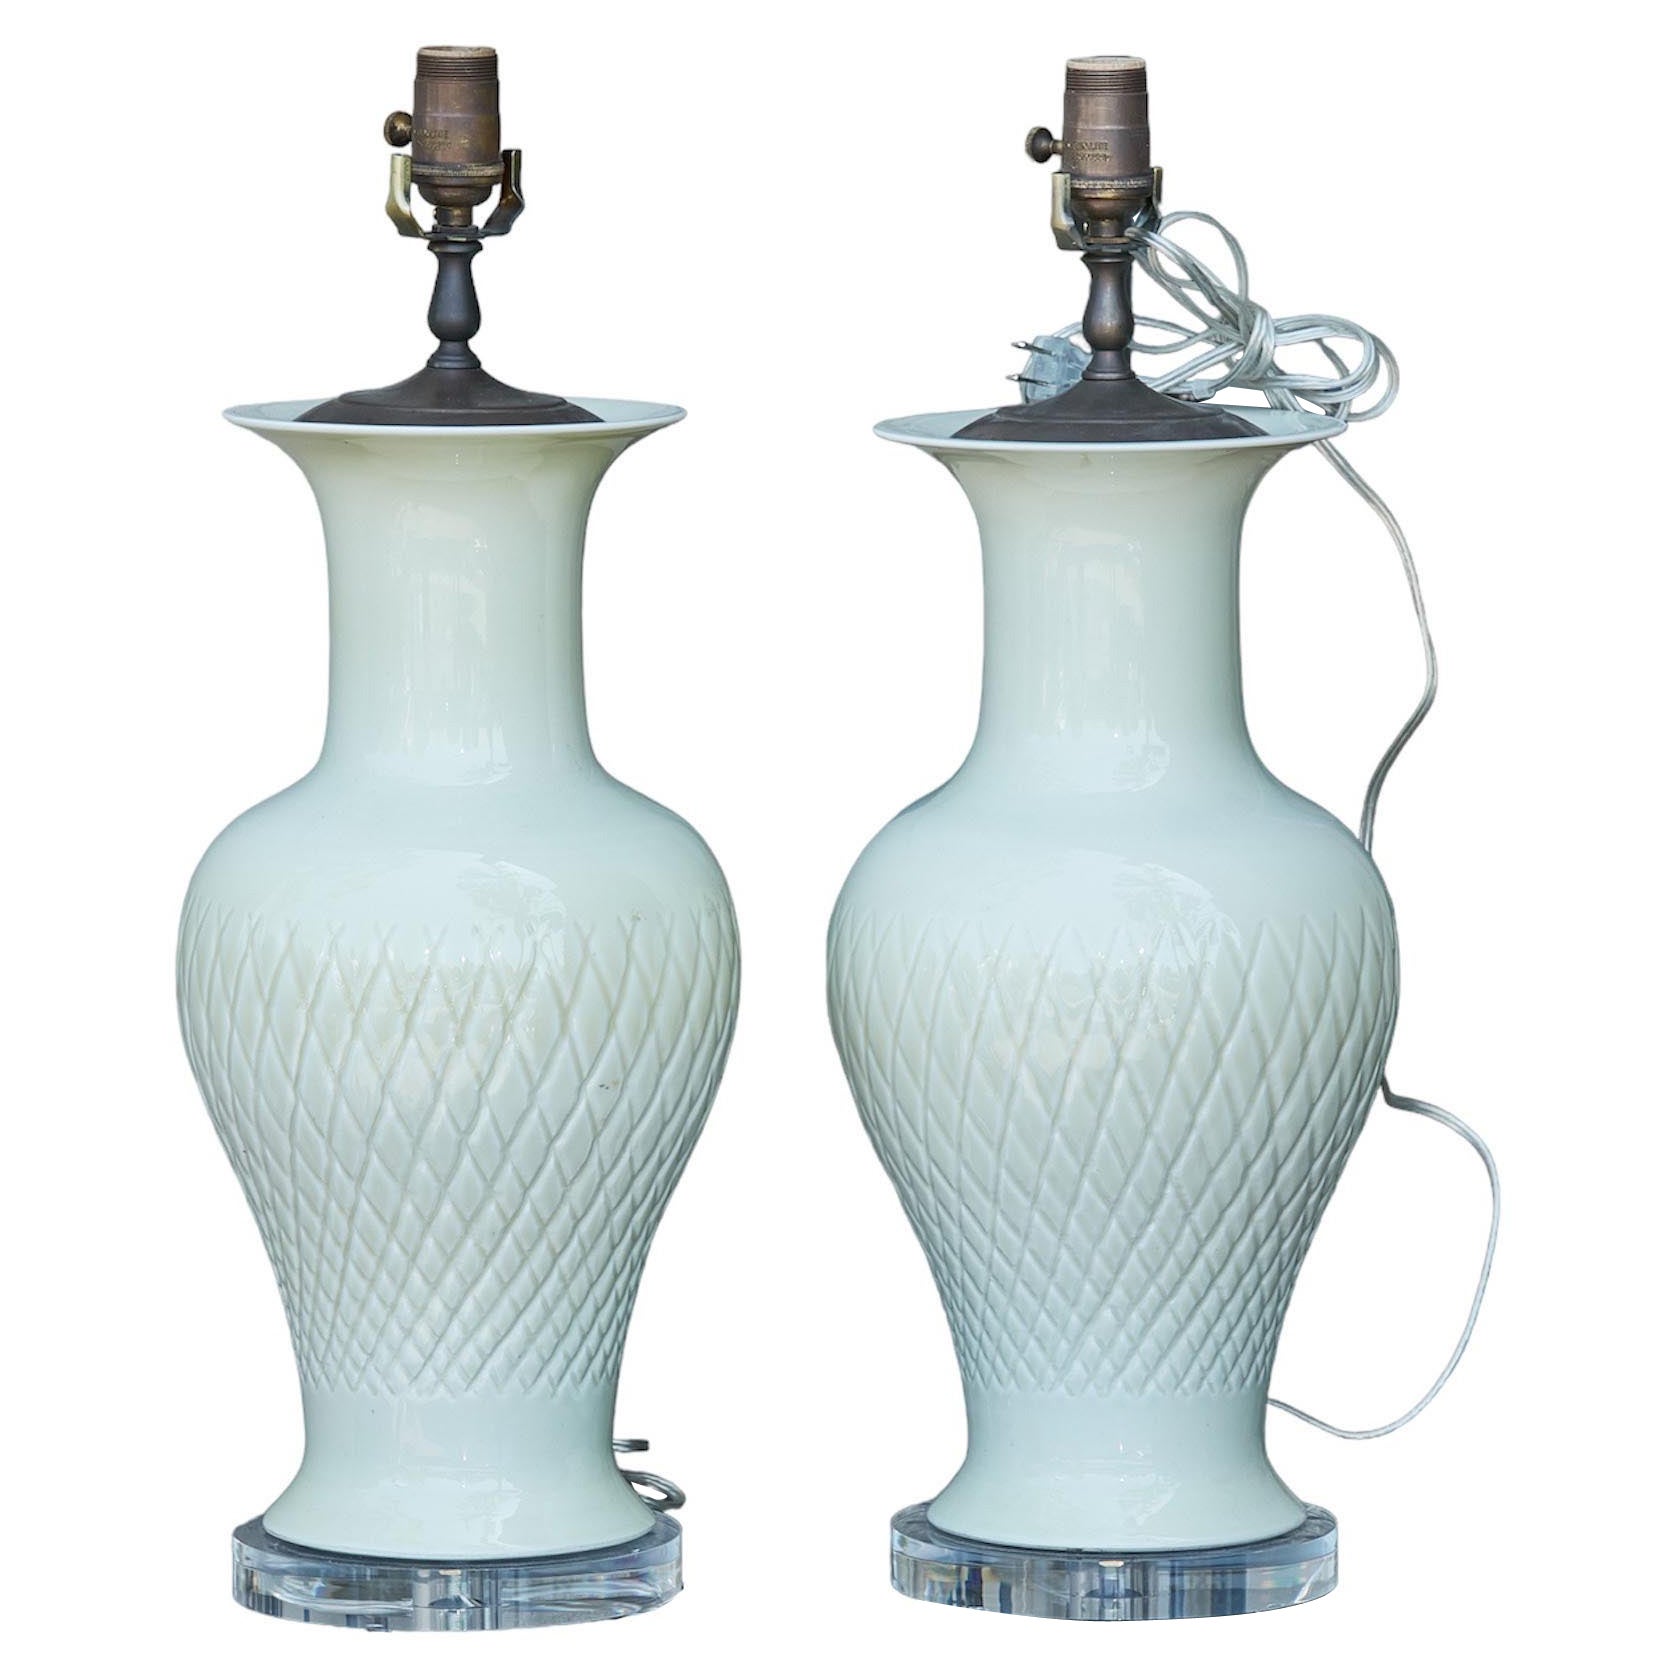 Pair of Asian Celadon Table Lamps with Custom Lucite Bases, Wired for the US